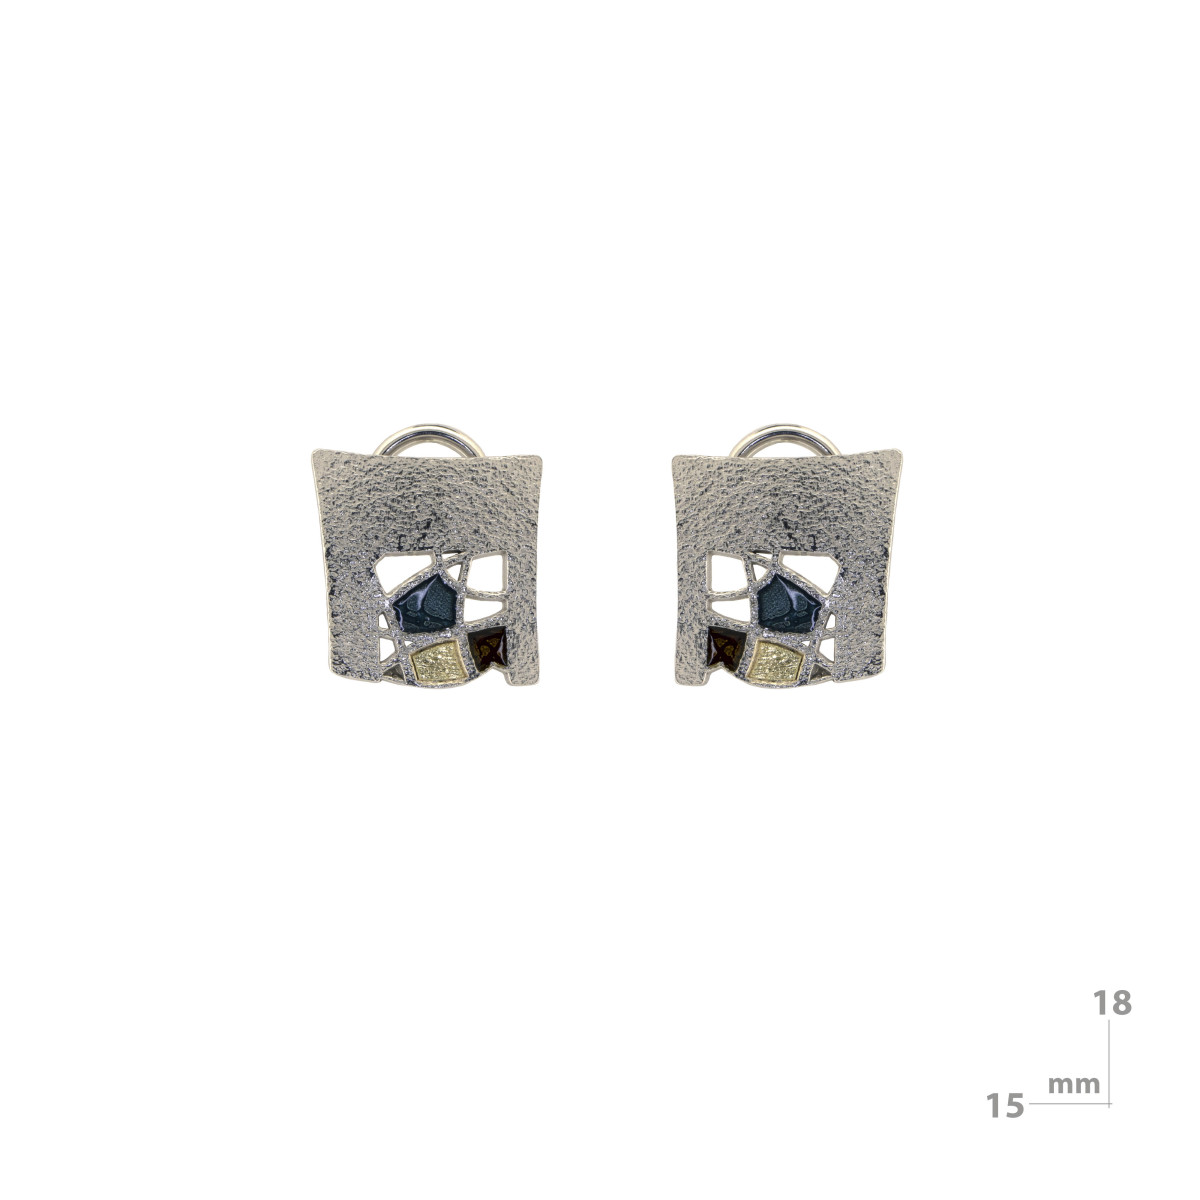 Silver and 18k gold earrings, enameled